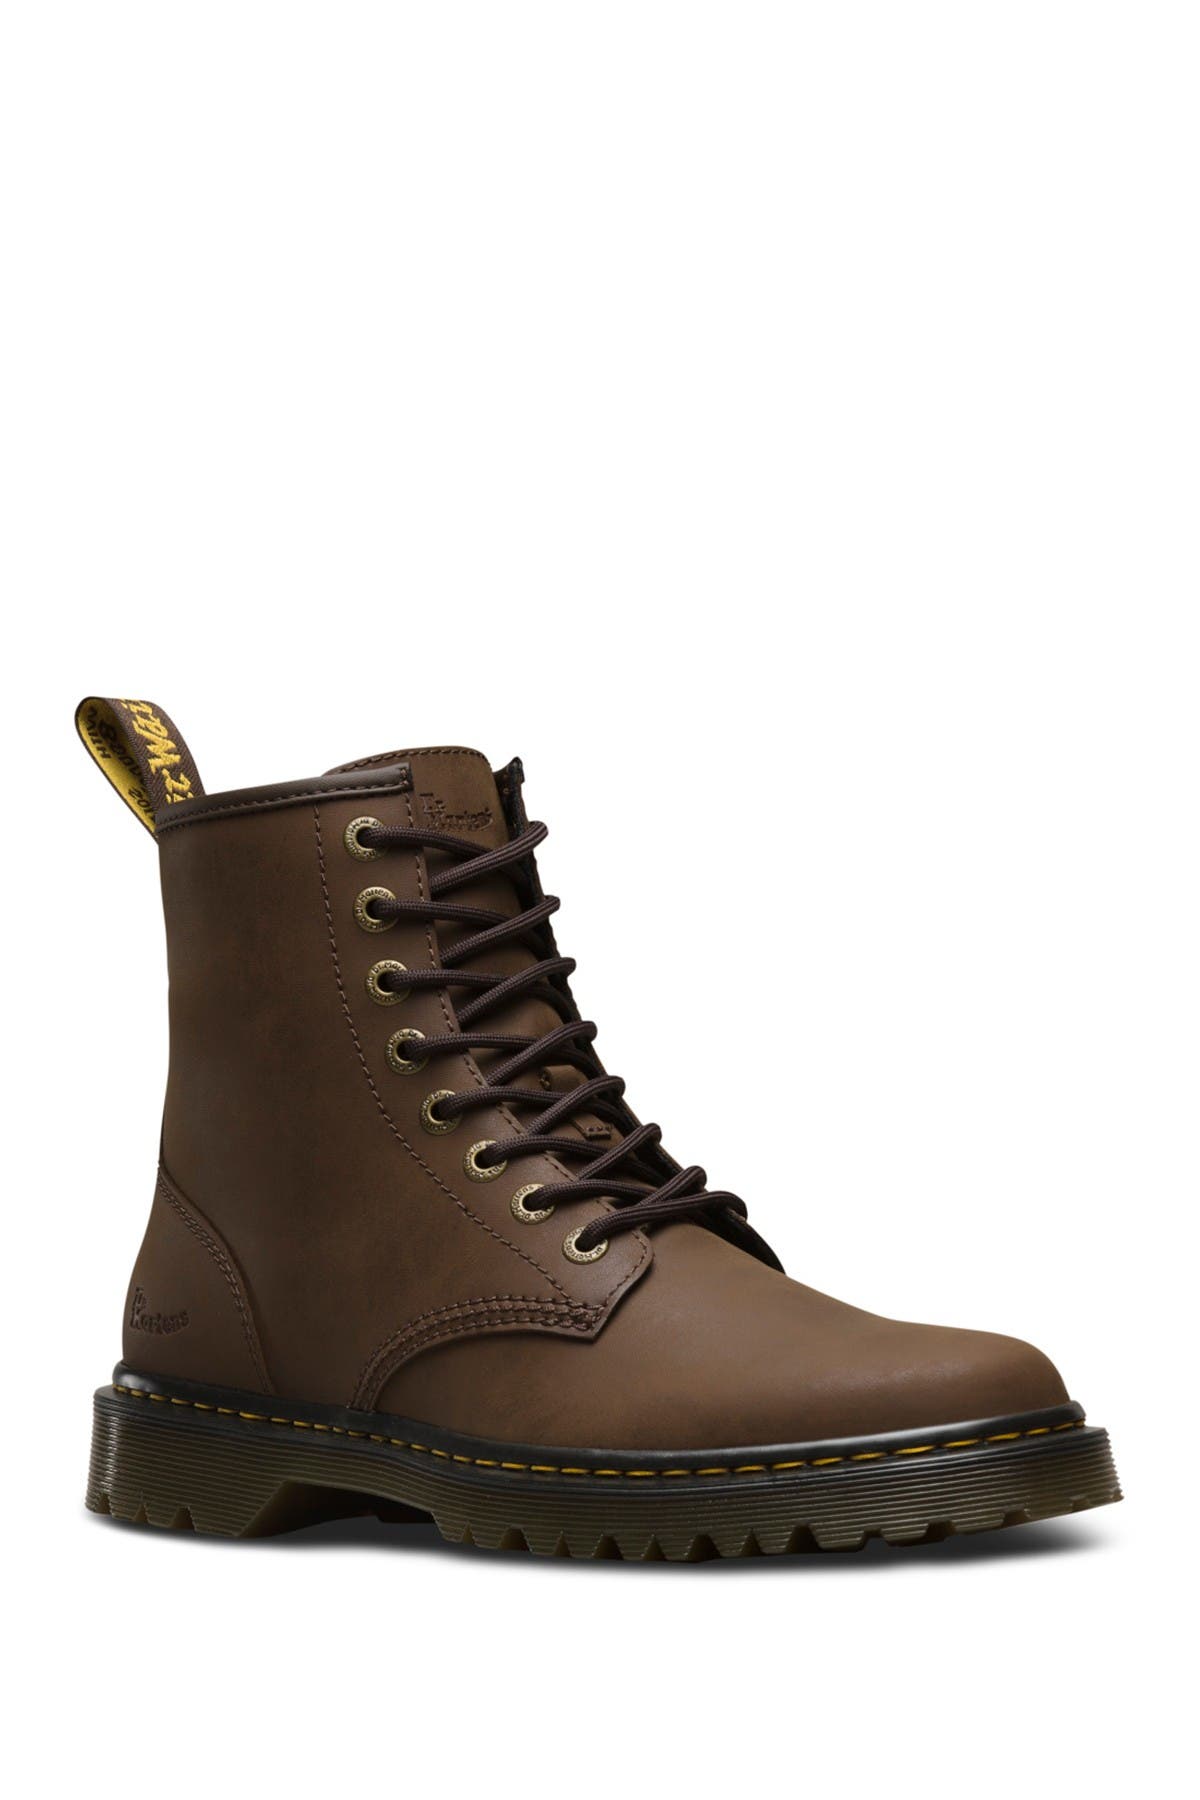 dr martens boots clearance